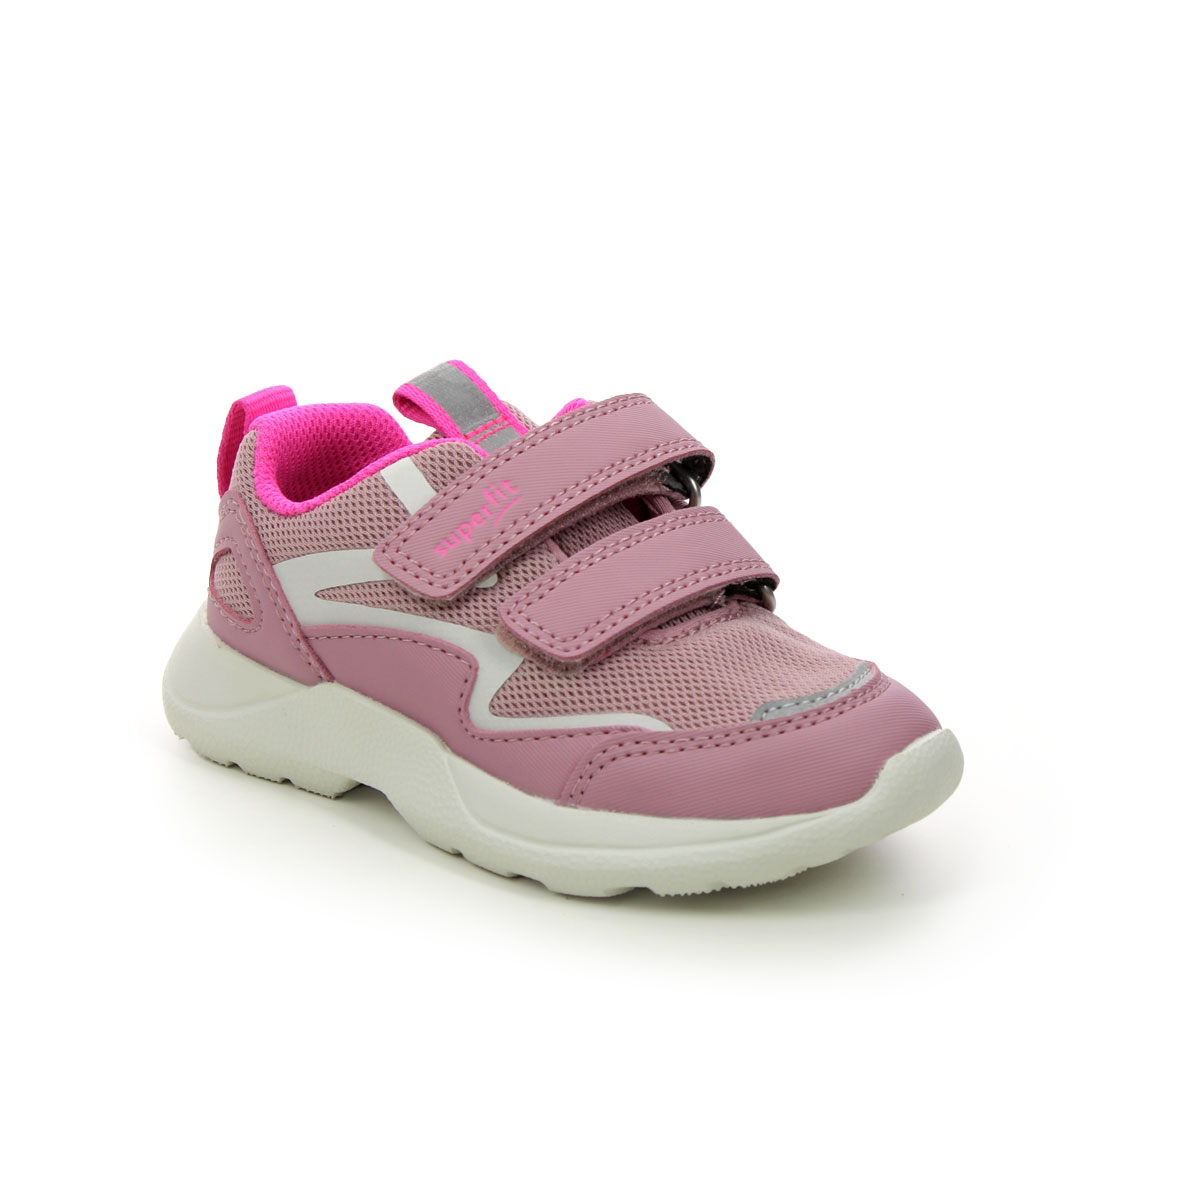 Superfit Rush Mini Pink Kids Girls Trainers 1006206-5510 In Size 27 In Plain Pink For kids